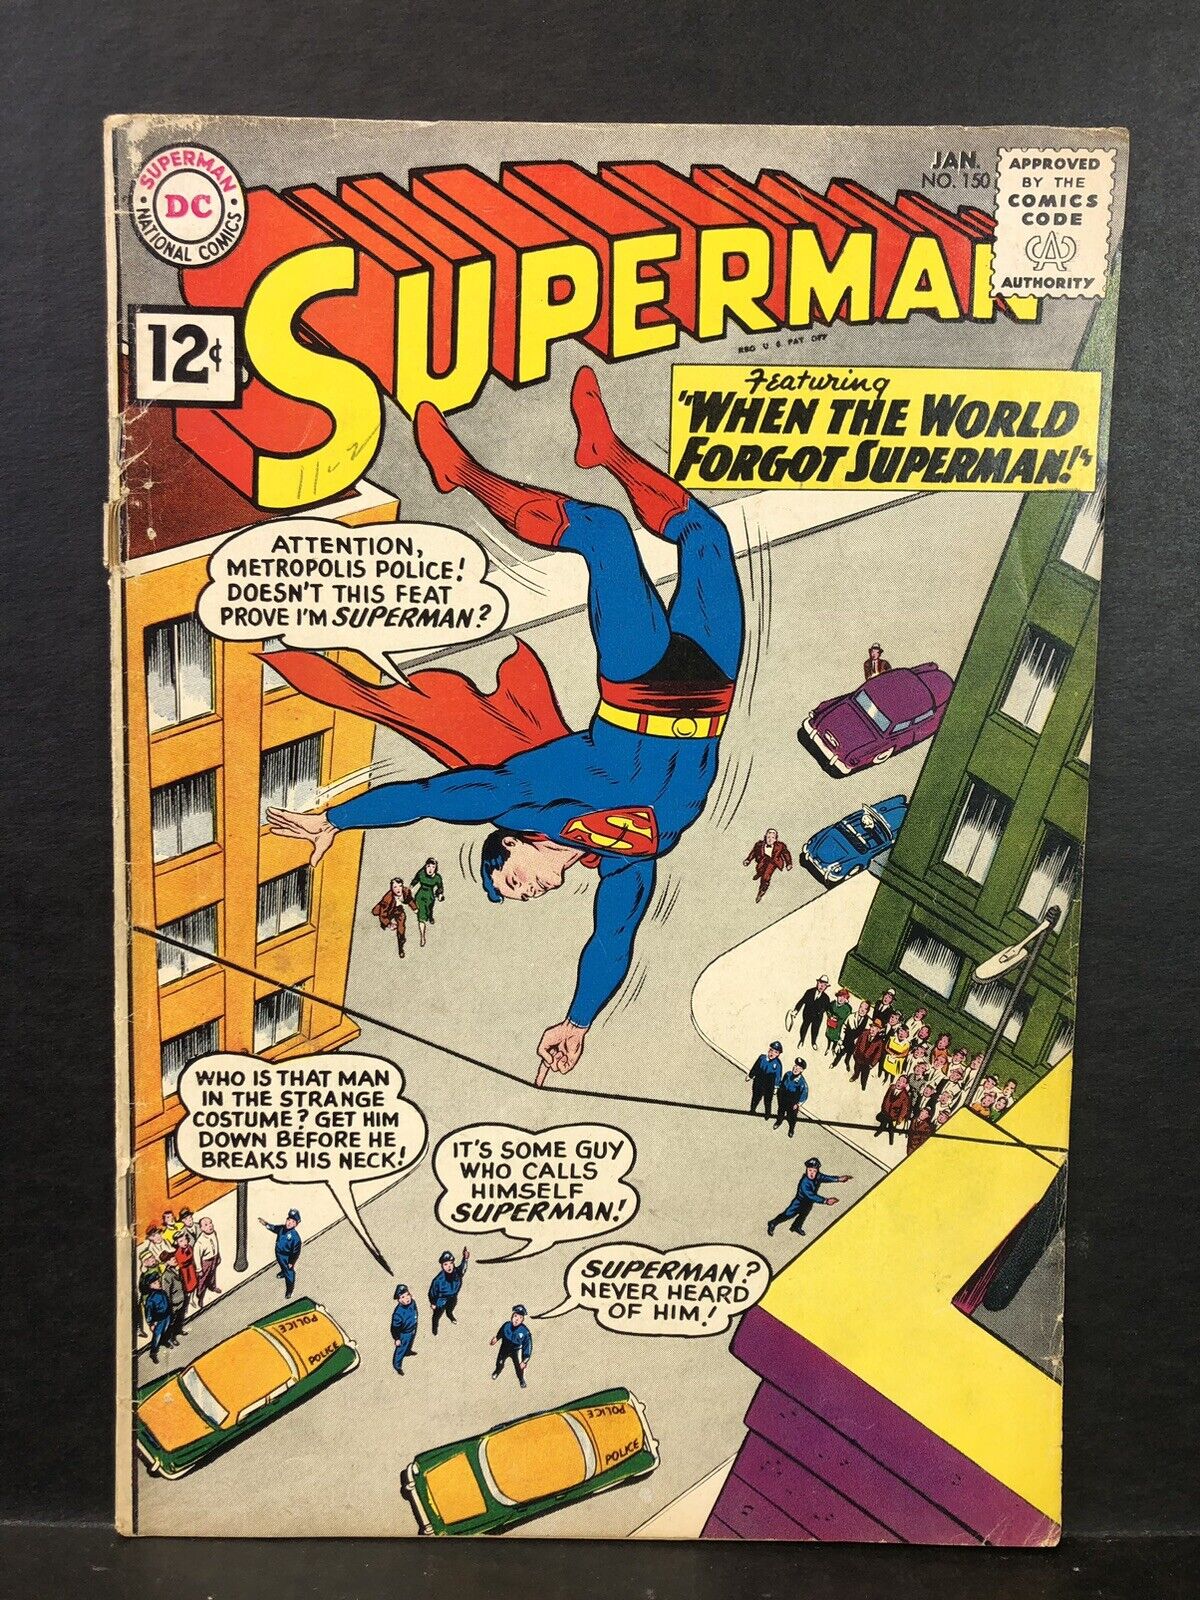 Superman #150 - The One Minute of Doom (DC, 1962)